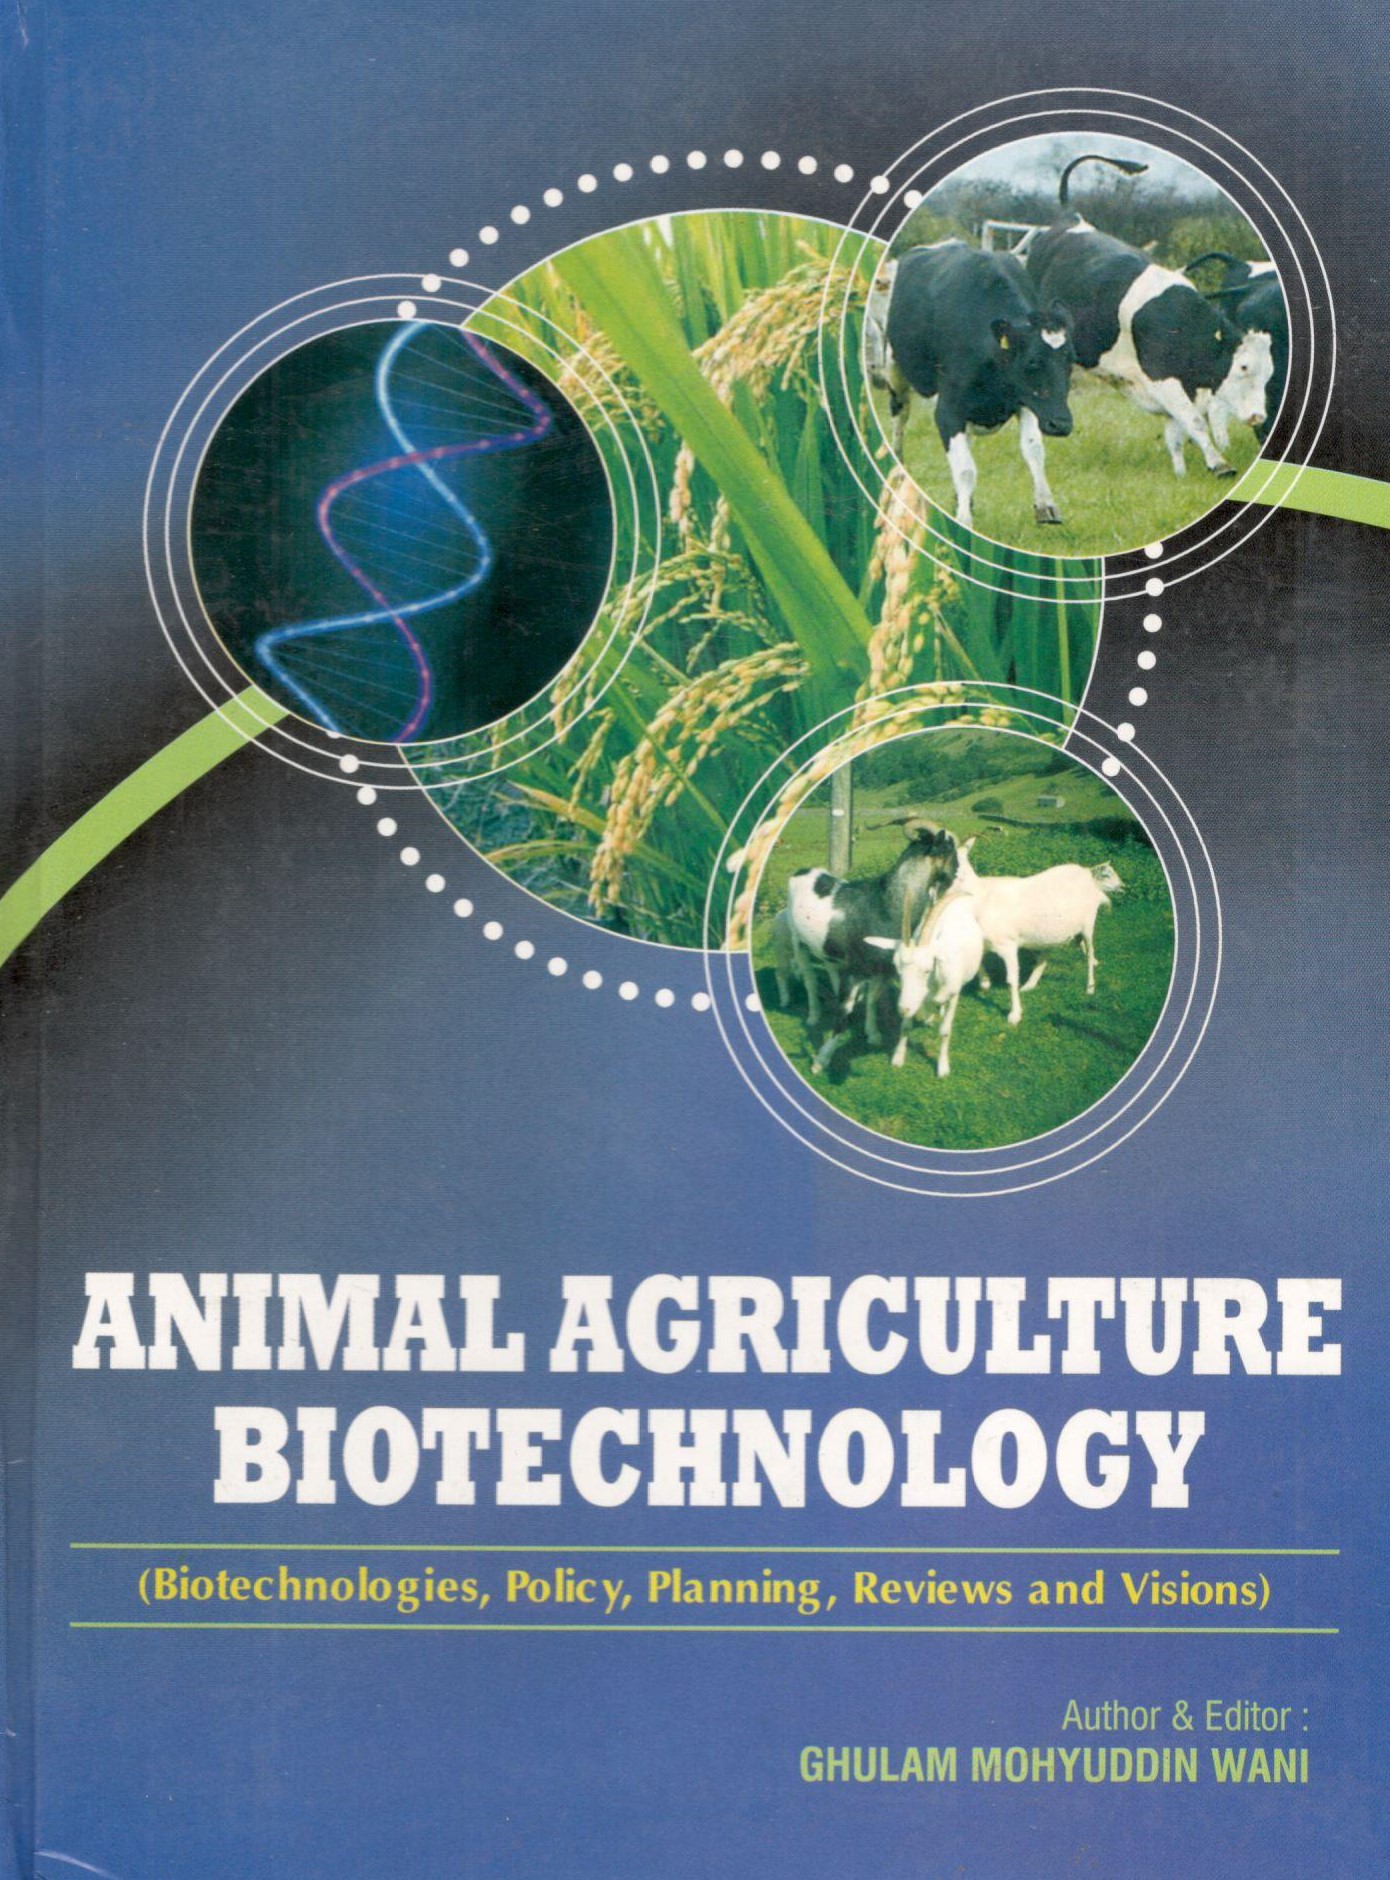 Animal Agriculture Biotechnology